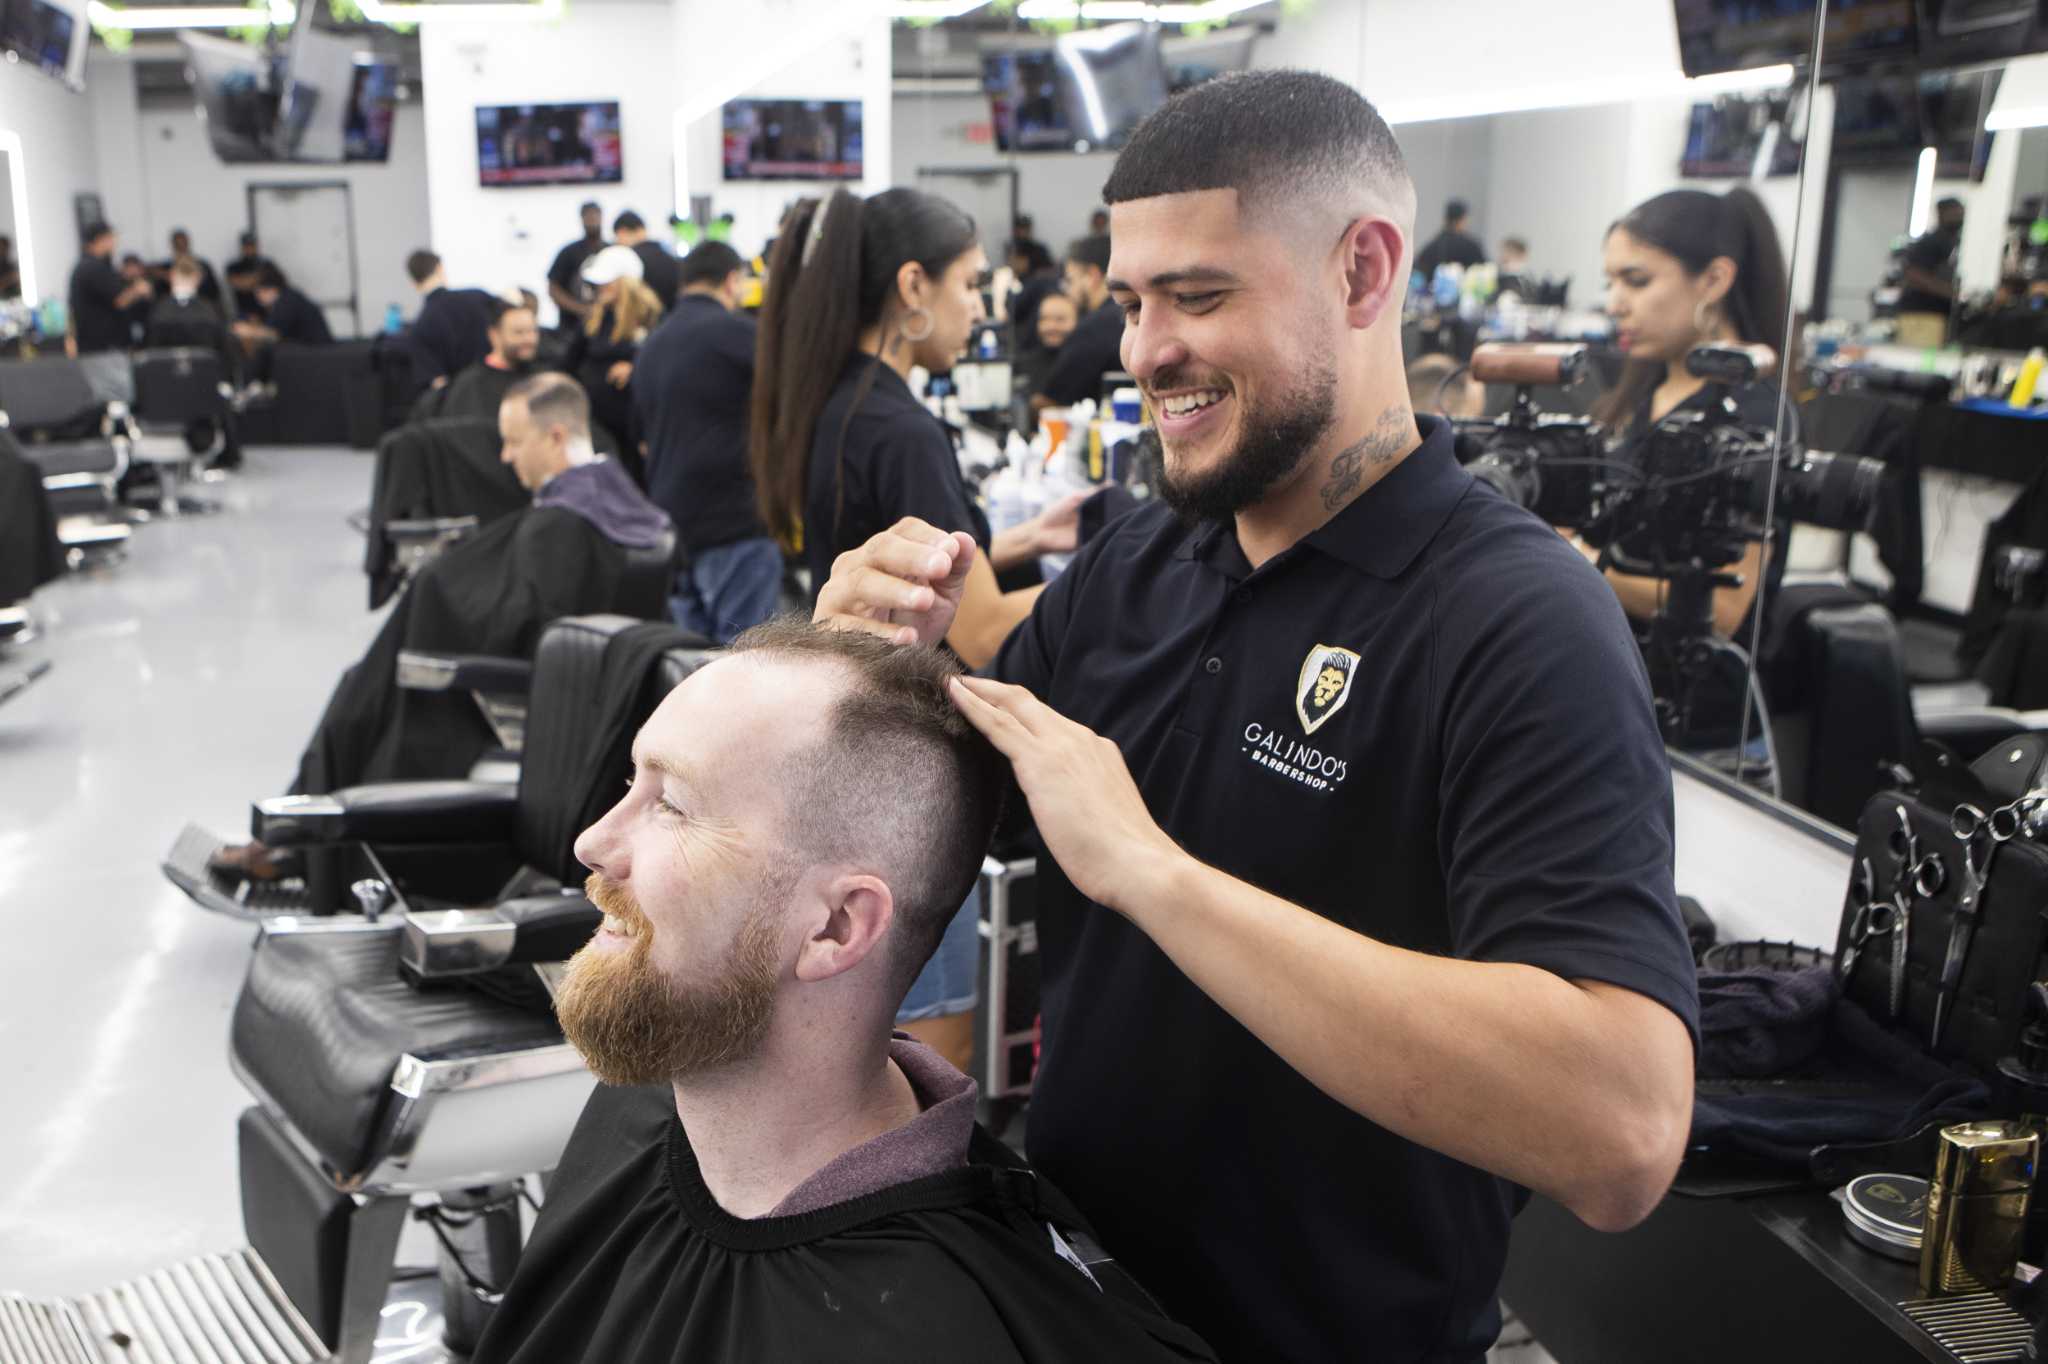 Organization teams with local barber shops to provide free back-to